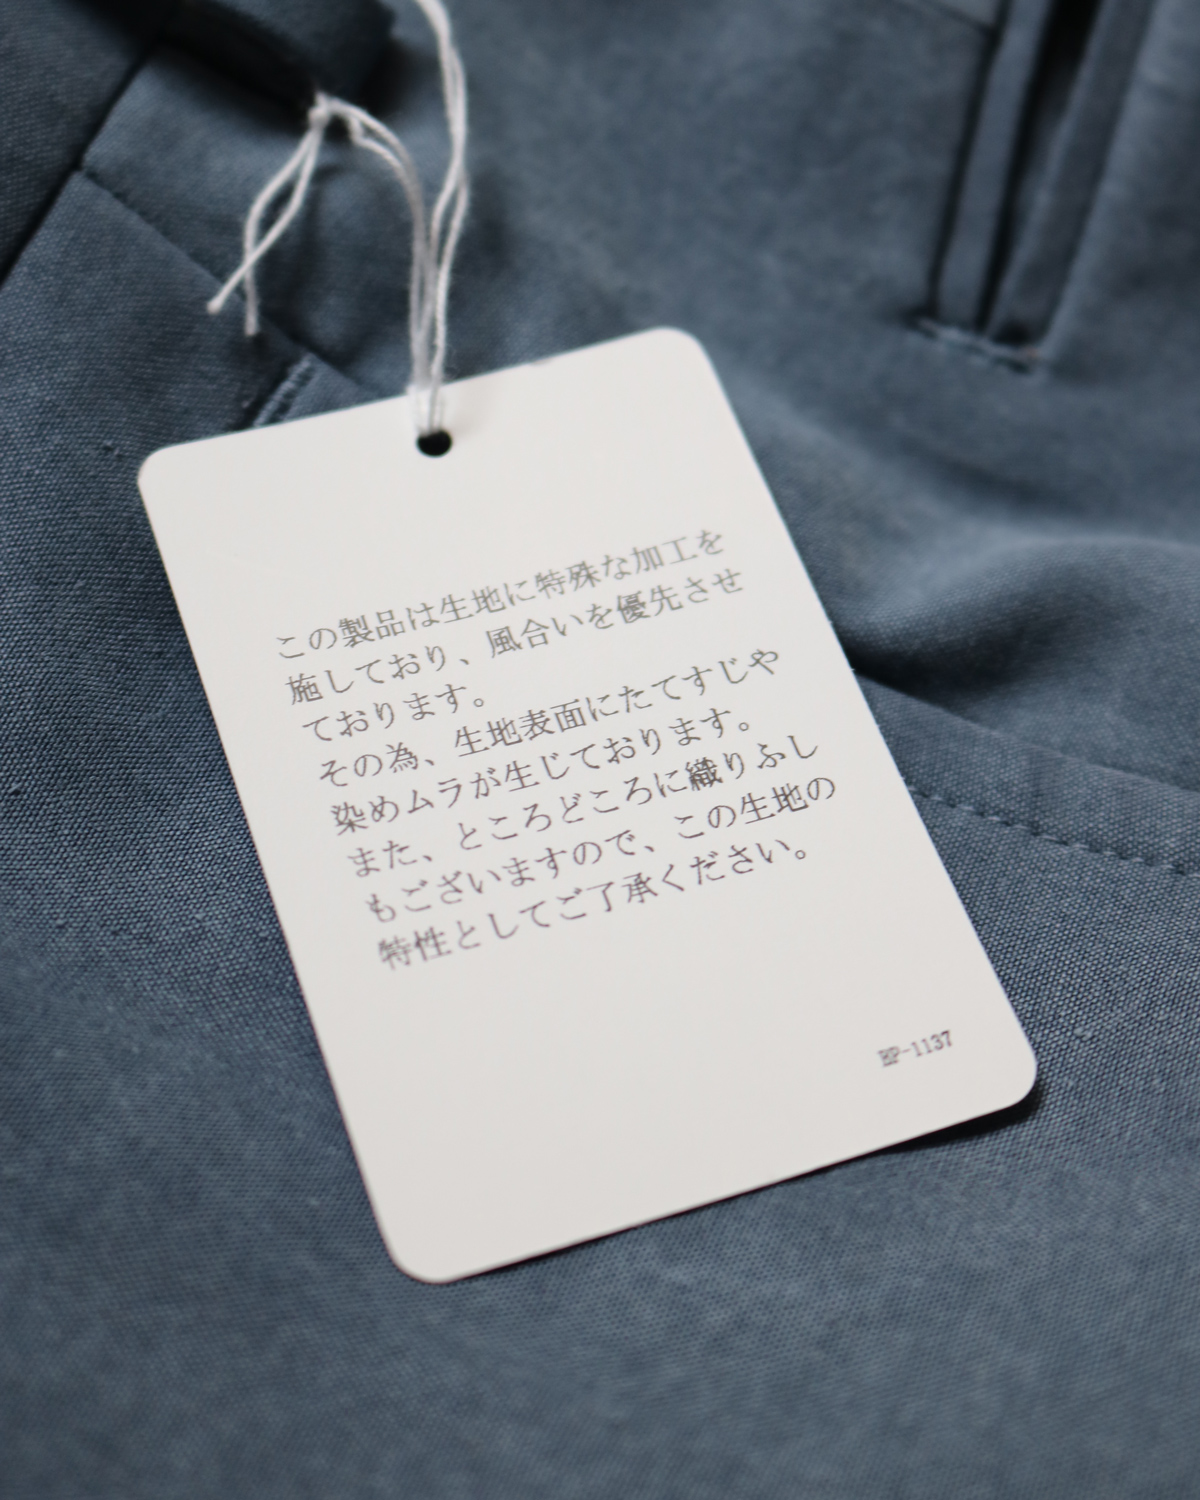 NEAT｜NEAT Chino | CELLULOSE NIDOM - Blue Gray <EXCLUSIVE ...